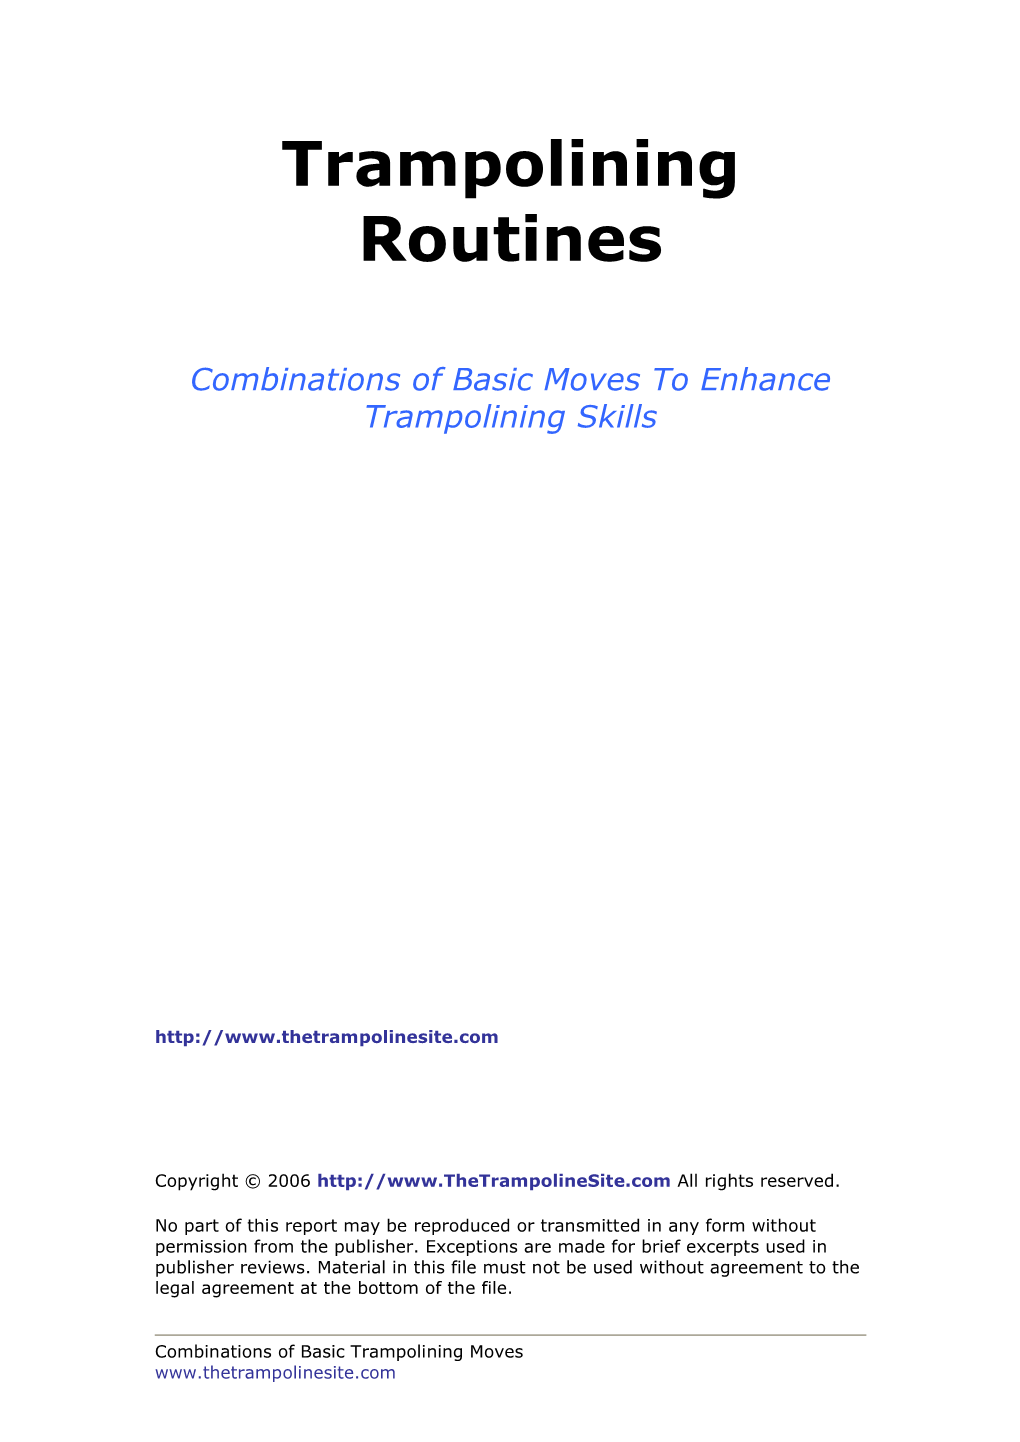 Trampolining Routines